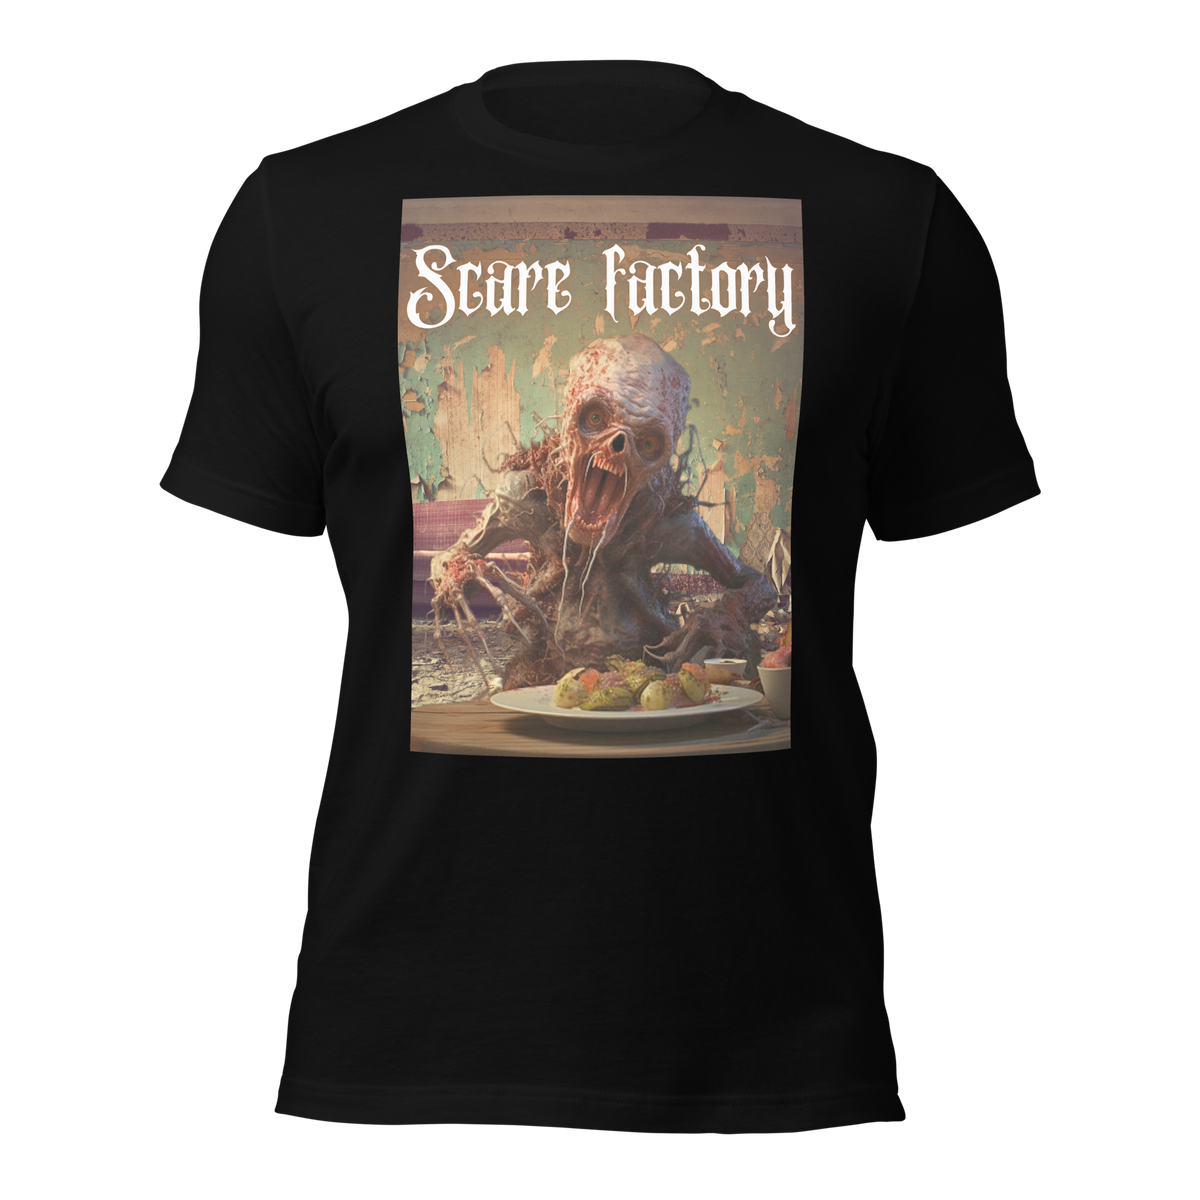 Scare Factory, Monster Dining, Creepy Chic, Horror Fashion, Eerie Apparel, Dark Style, Spooky Wear, Monster Threads, Macabre Clothing, Chilling Fashion, Scary Tee, Haunting Ensemble, Creep Couture, Horror Wardrobe, Unconventional Fashion, Monster Feast, Scare Style, Freaky Threads, Dark Humor Tee, Monster Munch